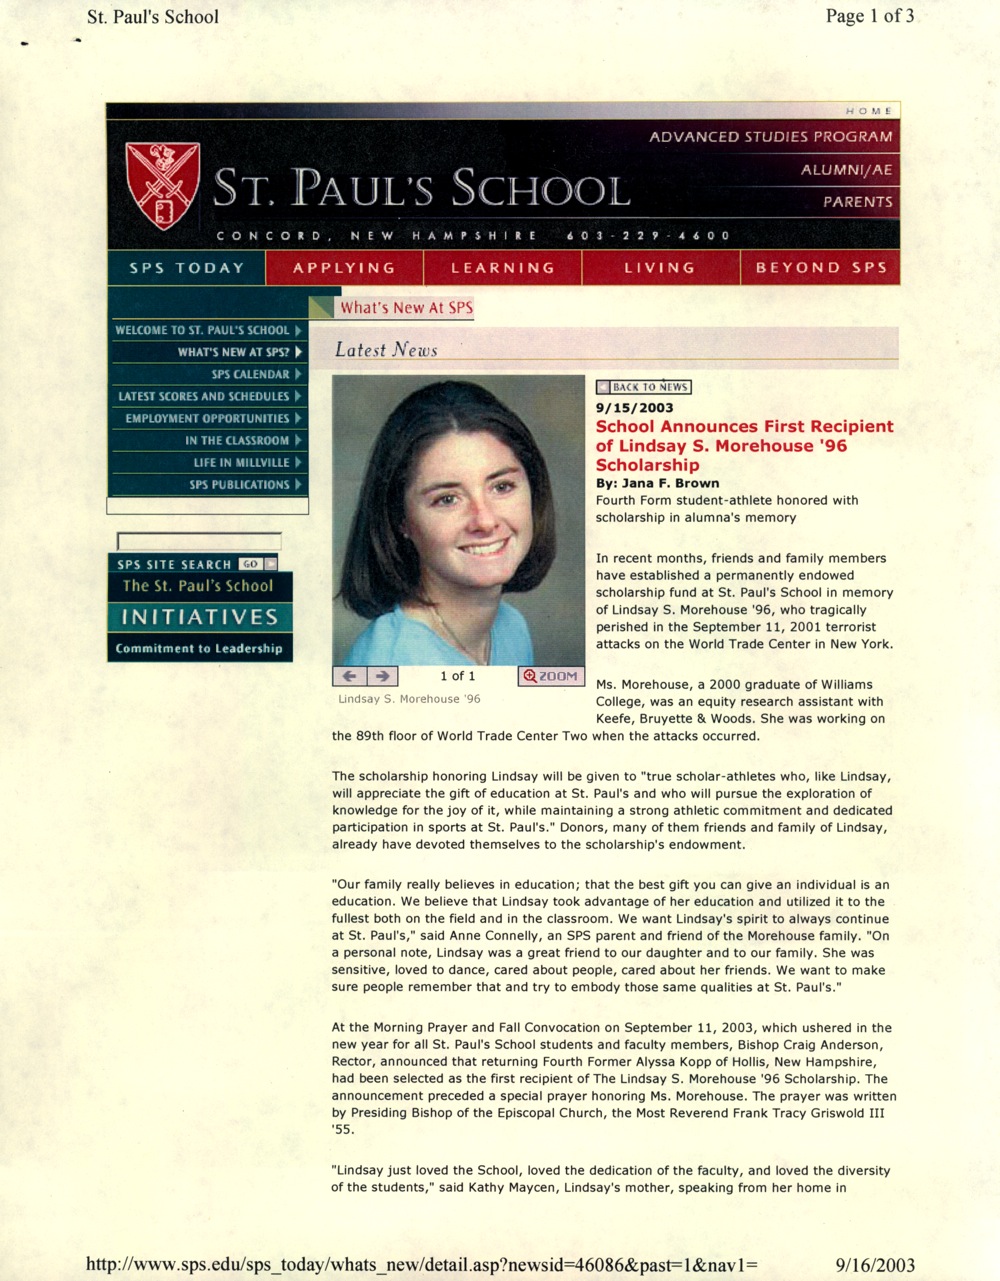 Article about Lindsay Morehouse on the St. Paul's School web site